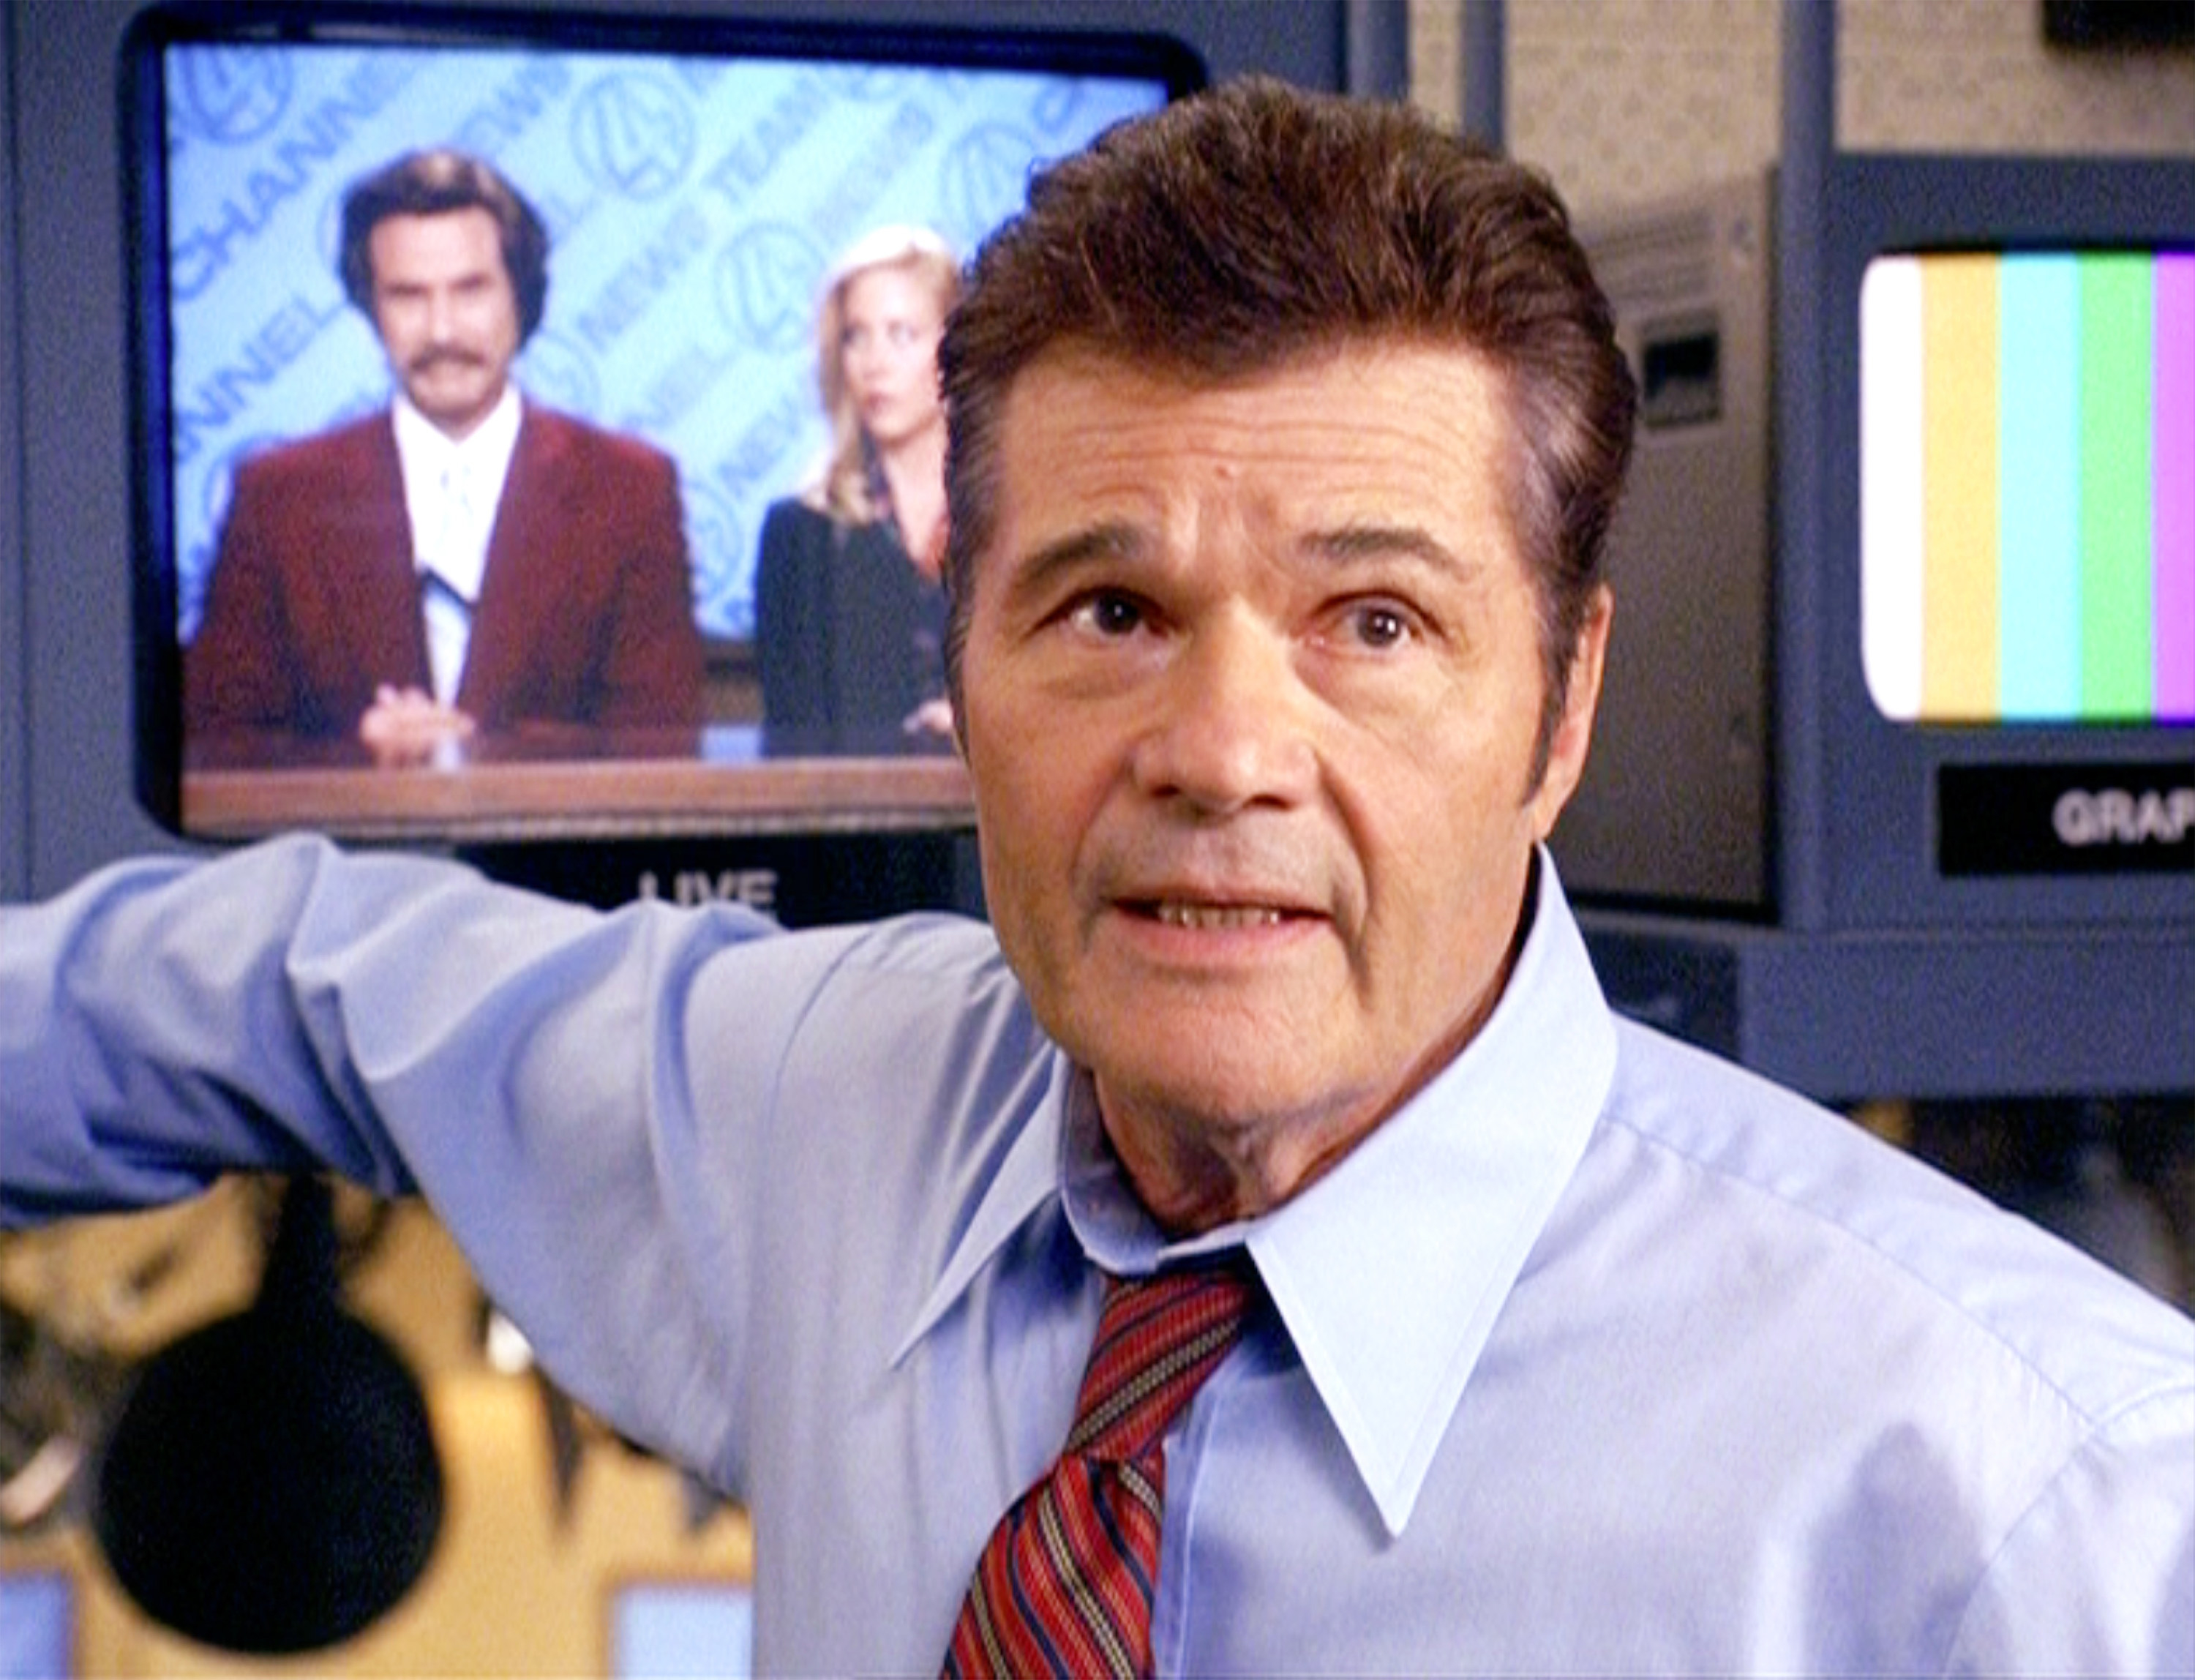 Fred Willard in a shirt and tie in front of televisions on the Ron Burgundy set